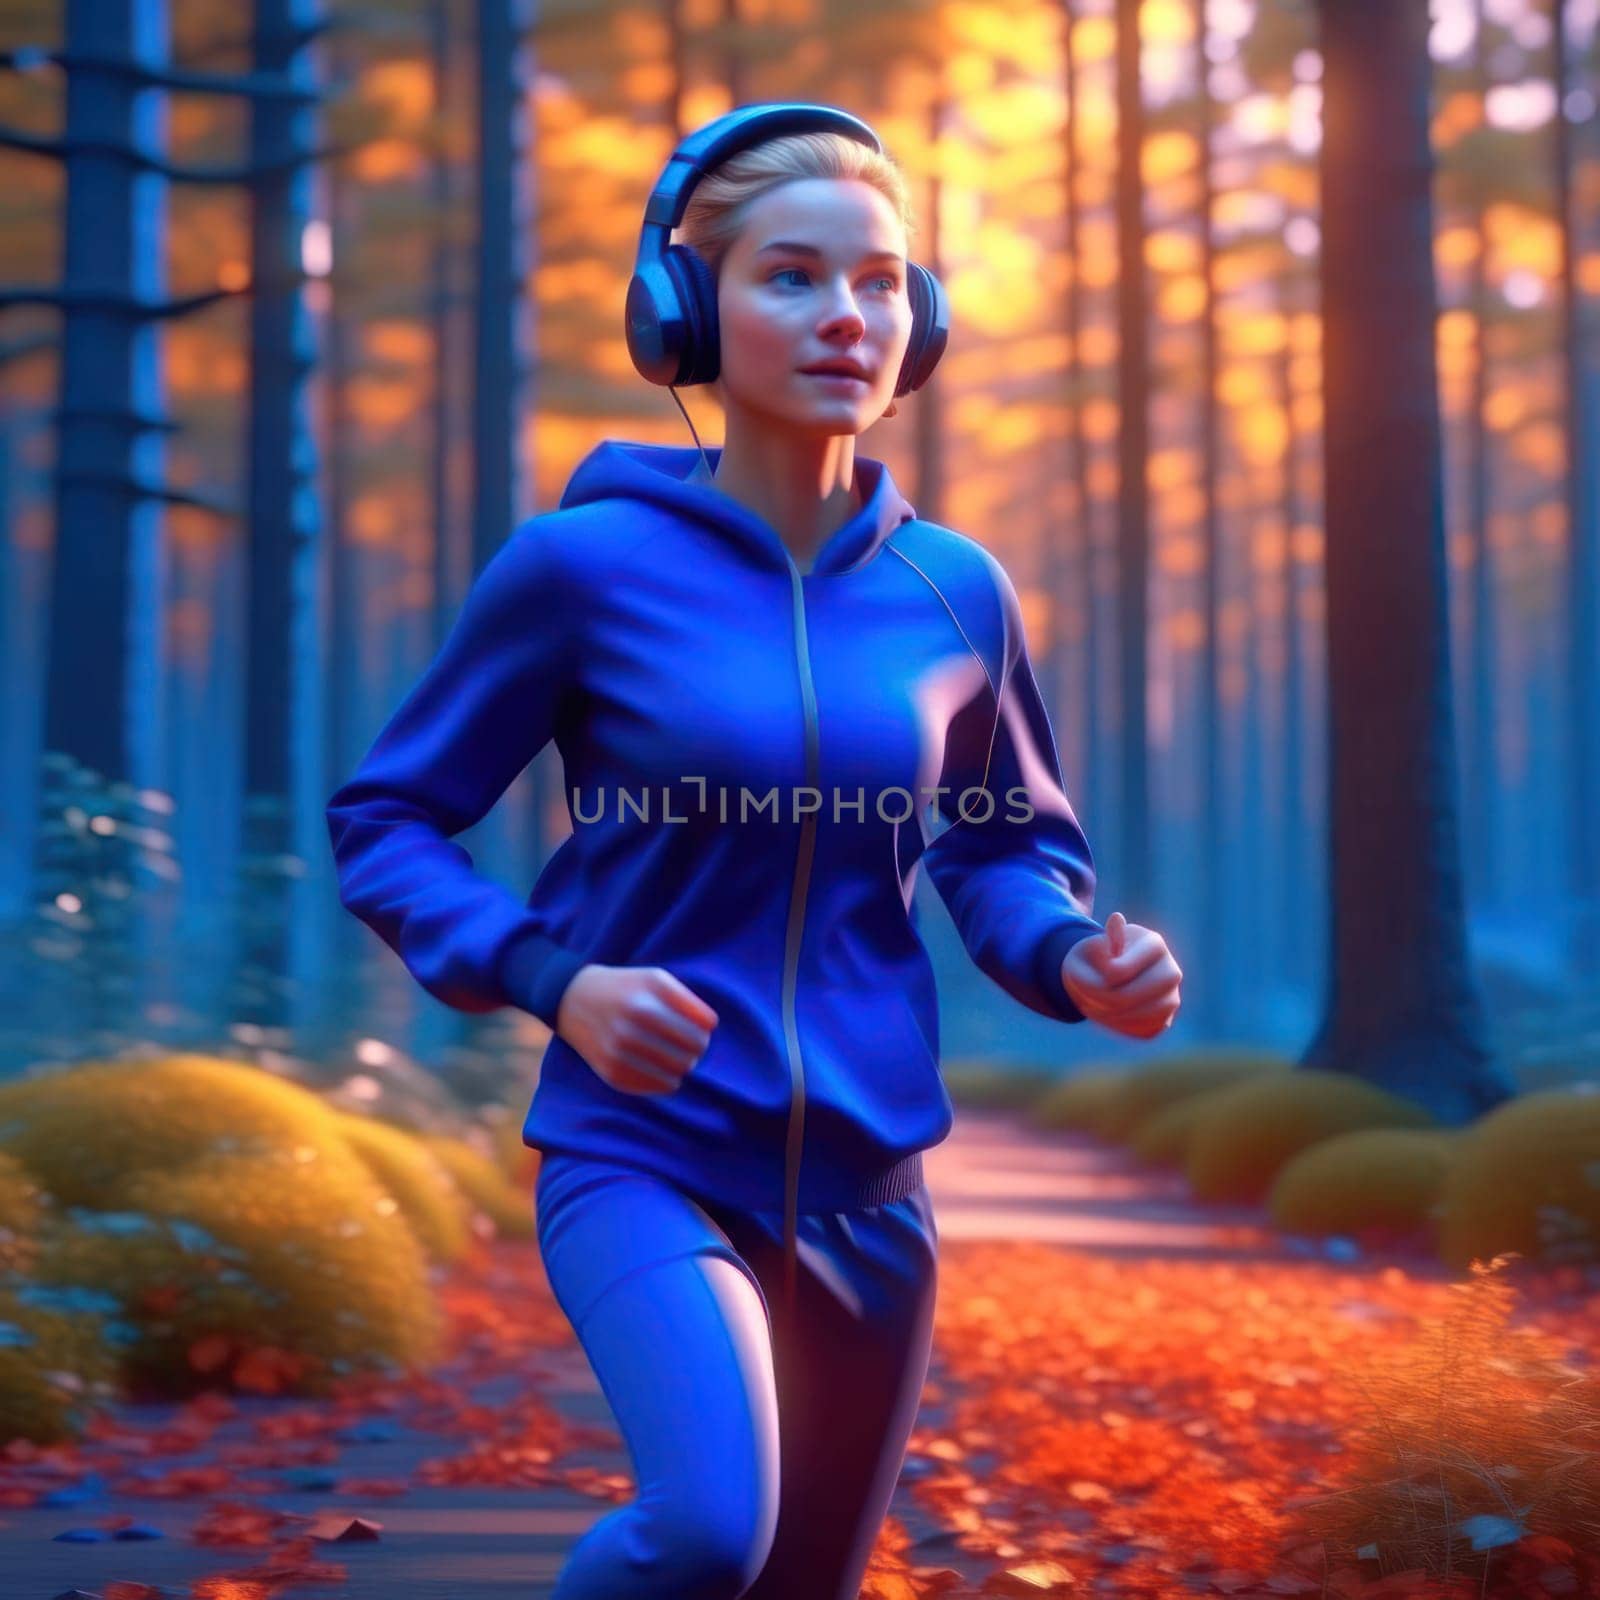 Girl jogging. Image created by AI